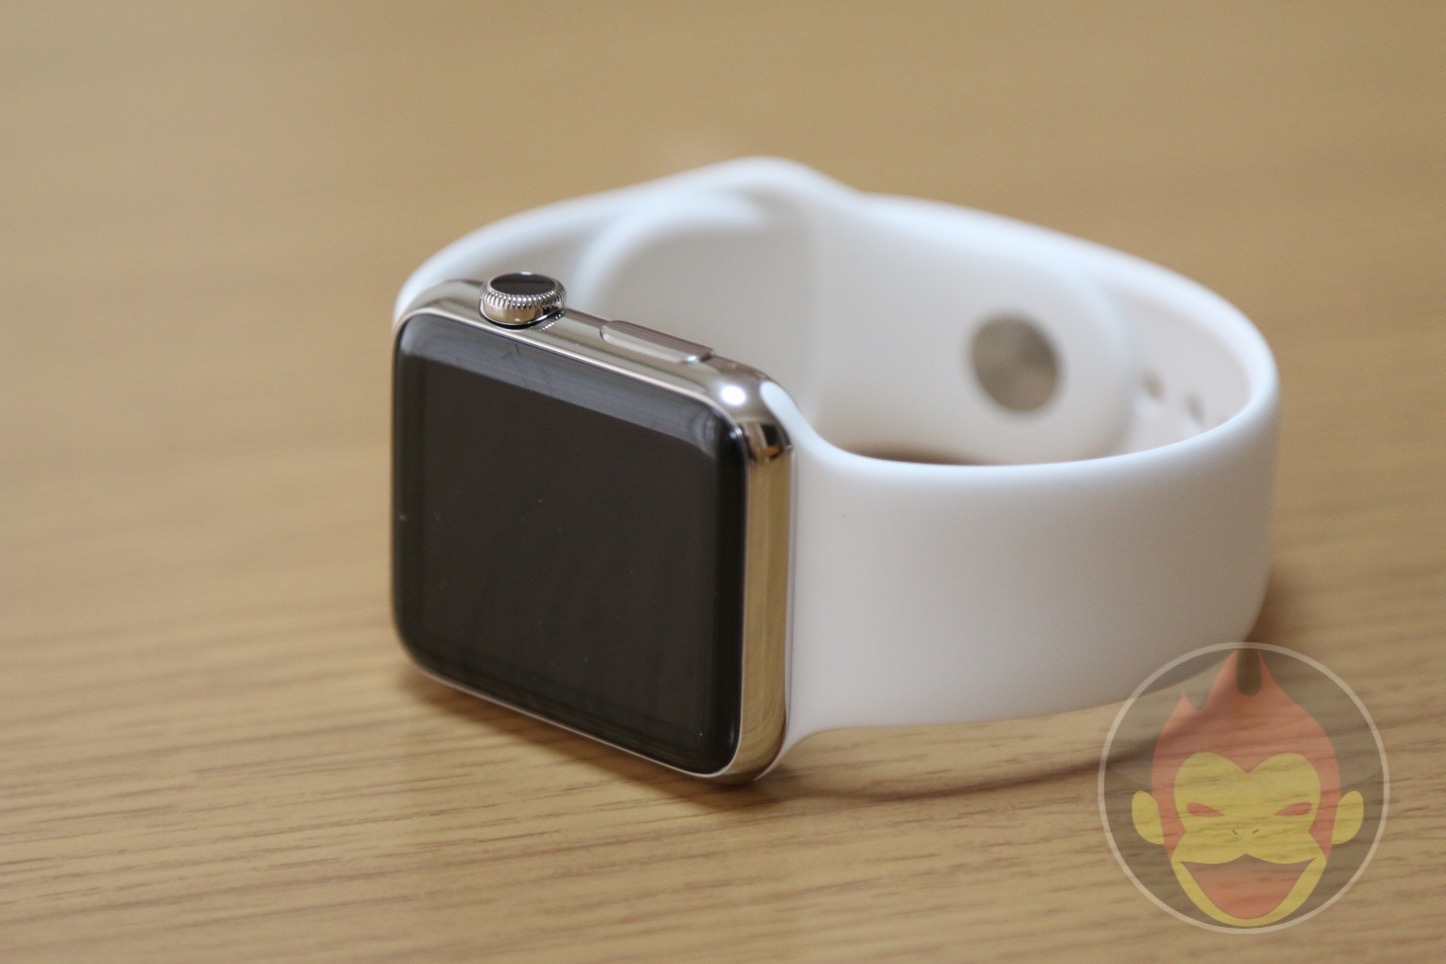 Apple-Watch-Stainless-Steel-White-Band-42mm-028.JPG